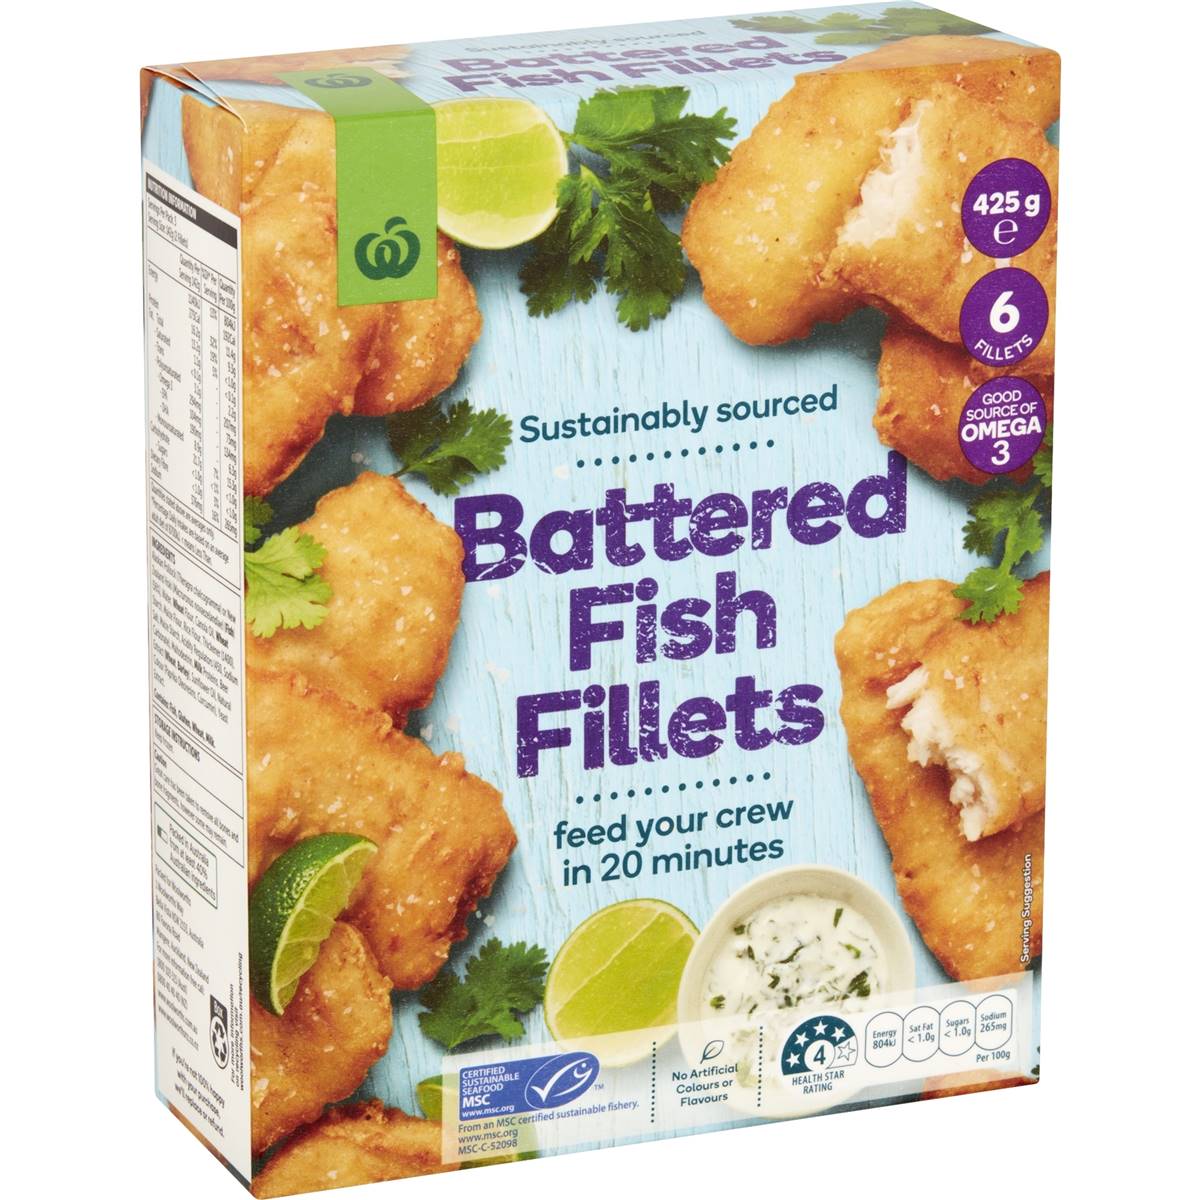 Calories in Woolworths Battered Fish Fillets